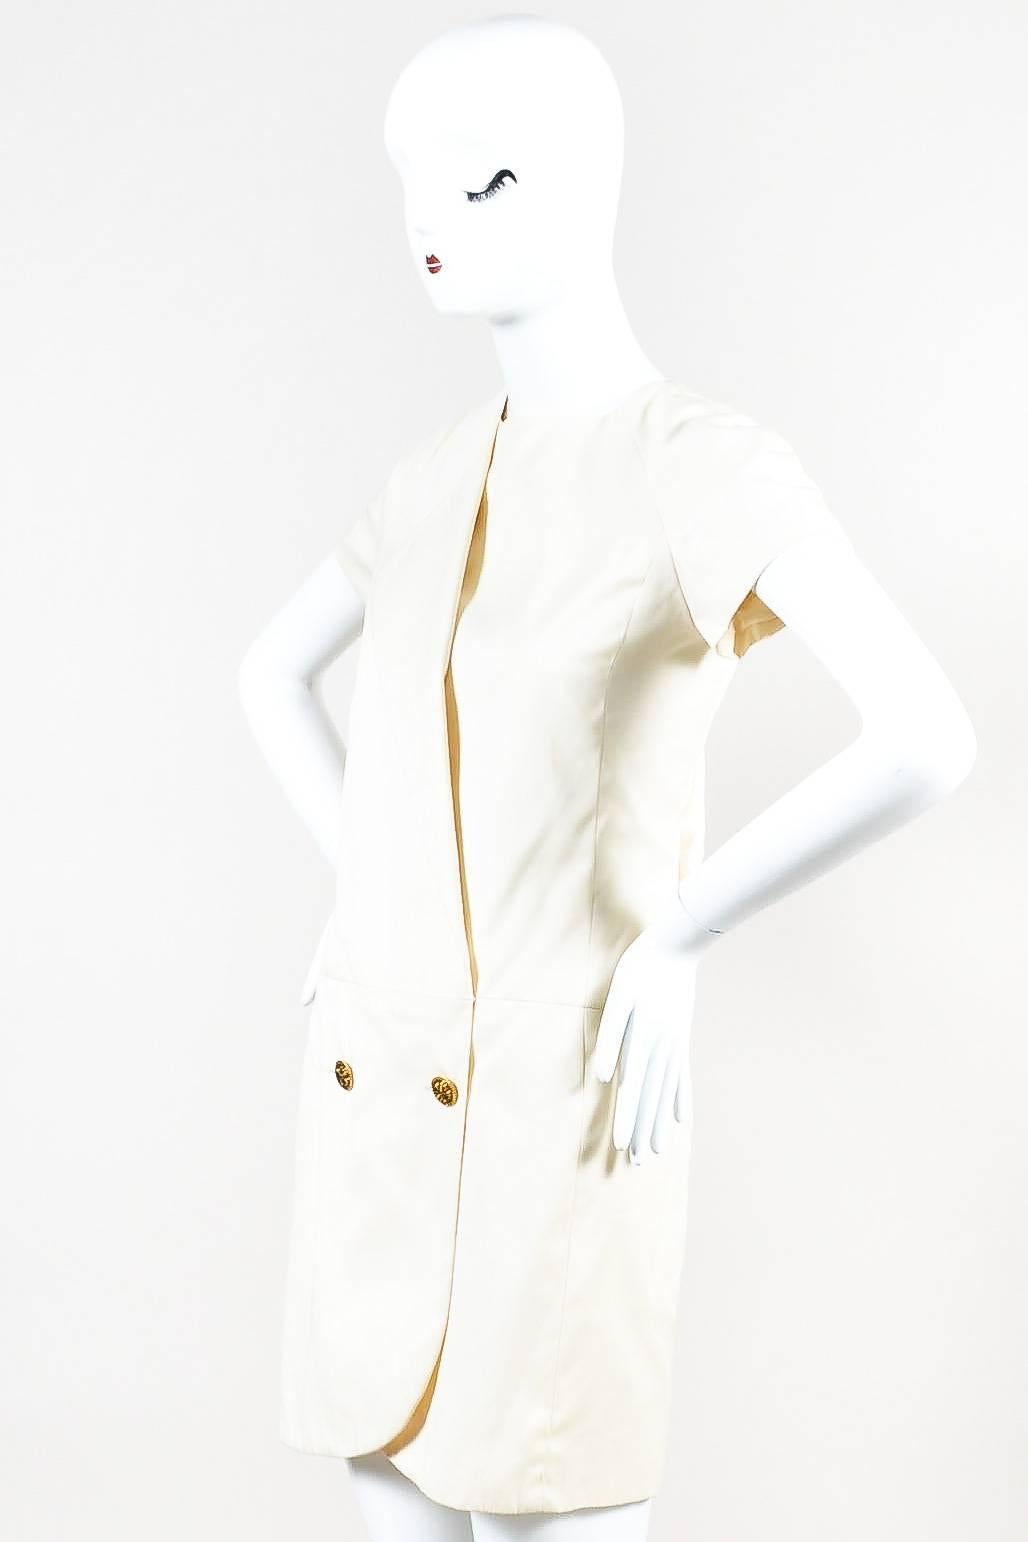 Vintage Chanel dress from the "CR 90" Collection features a cream cotton with short sleeves and a rounded neckline. Mid-thigh length, rounded hemline. Drop waist. Wrap front with gold tone clover button closures. Slanted folded panel at